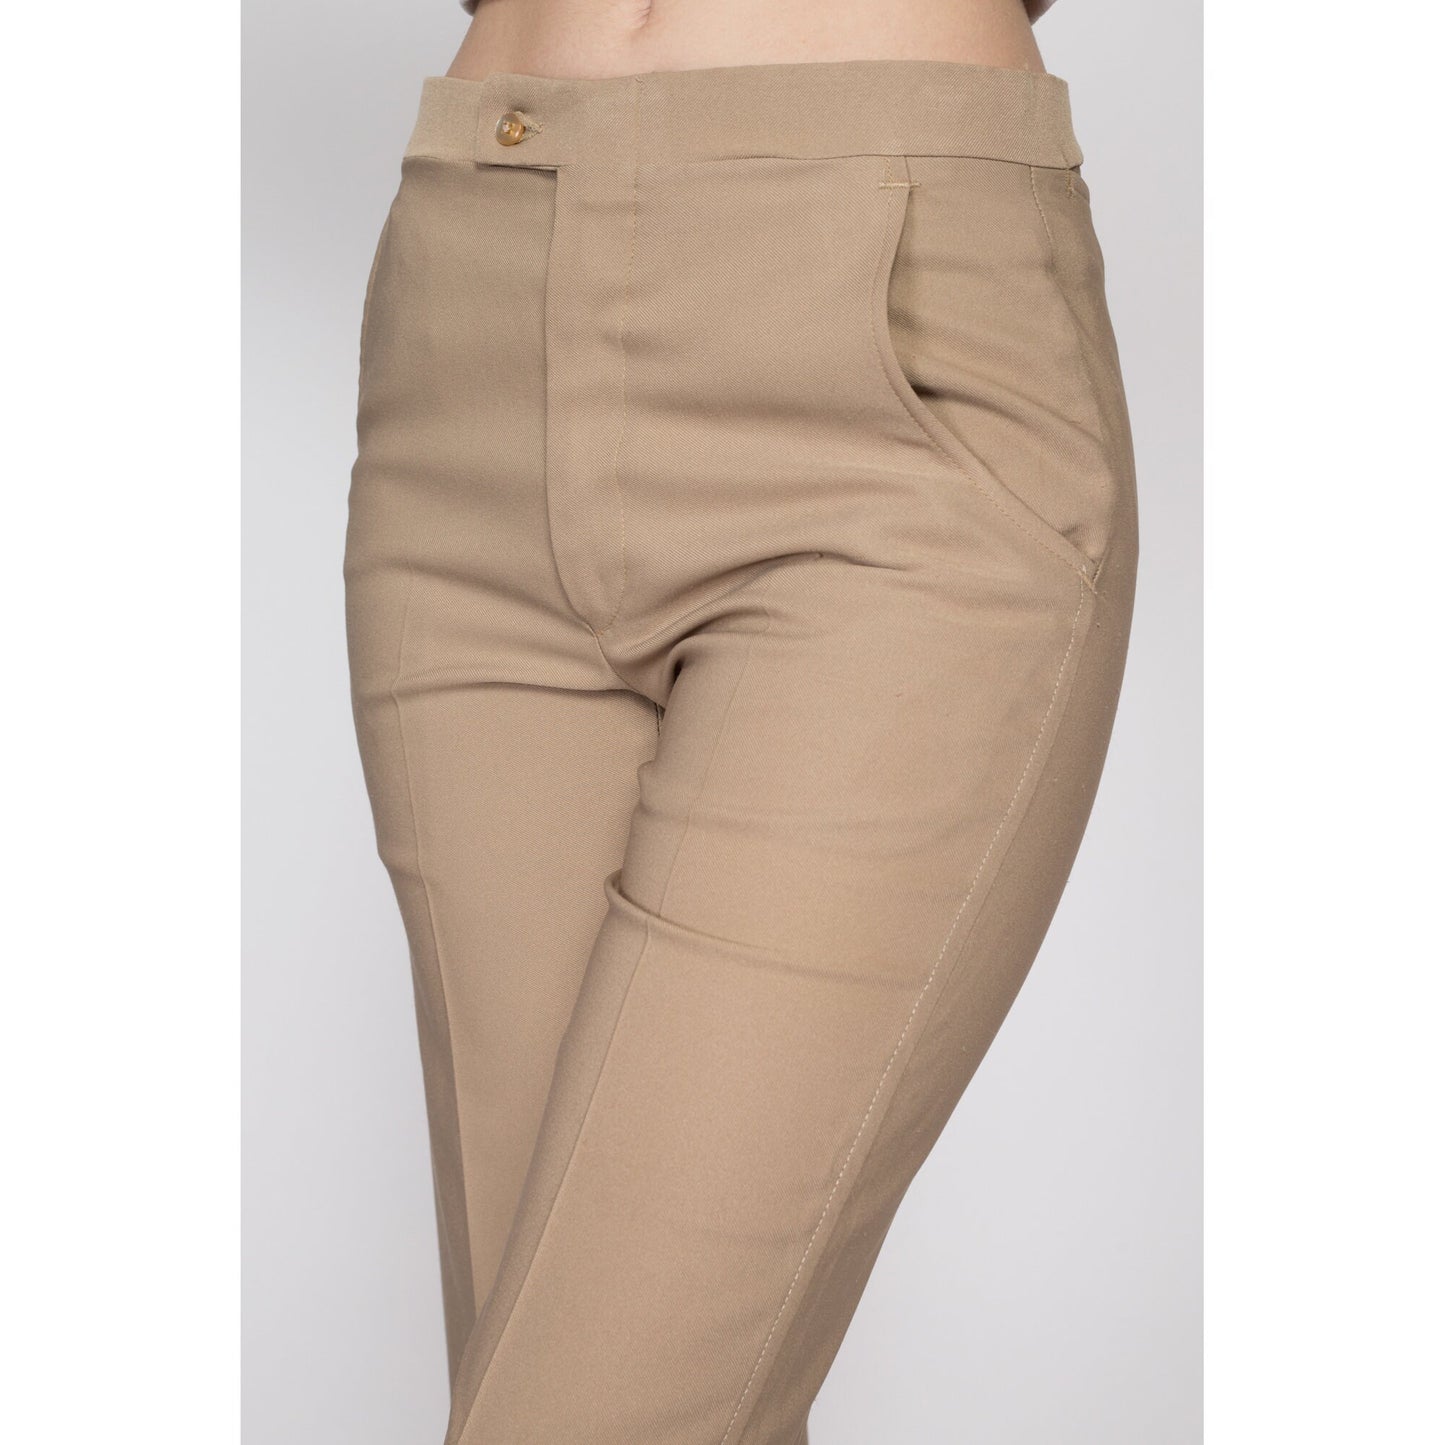 Small 70s Tan Mid Rise Flared Pants | Vintage Haggar Flares Retro Polyester Trousers